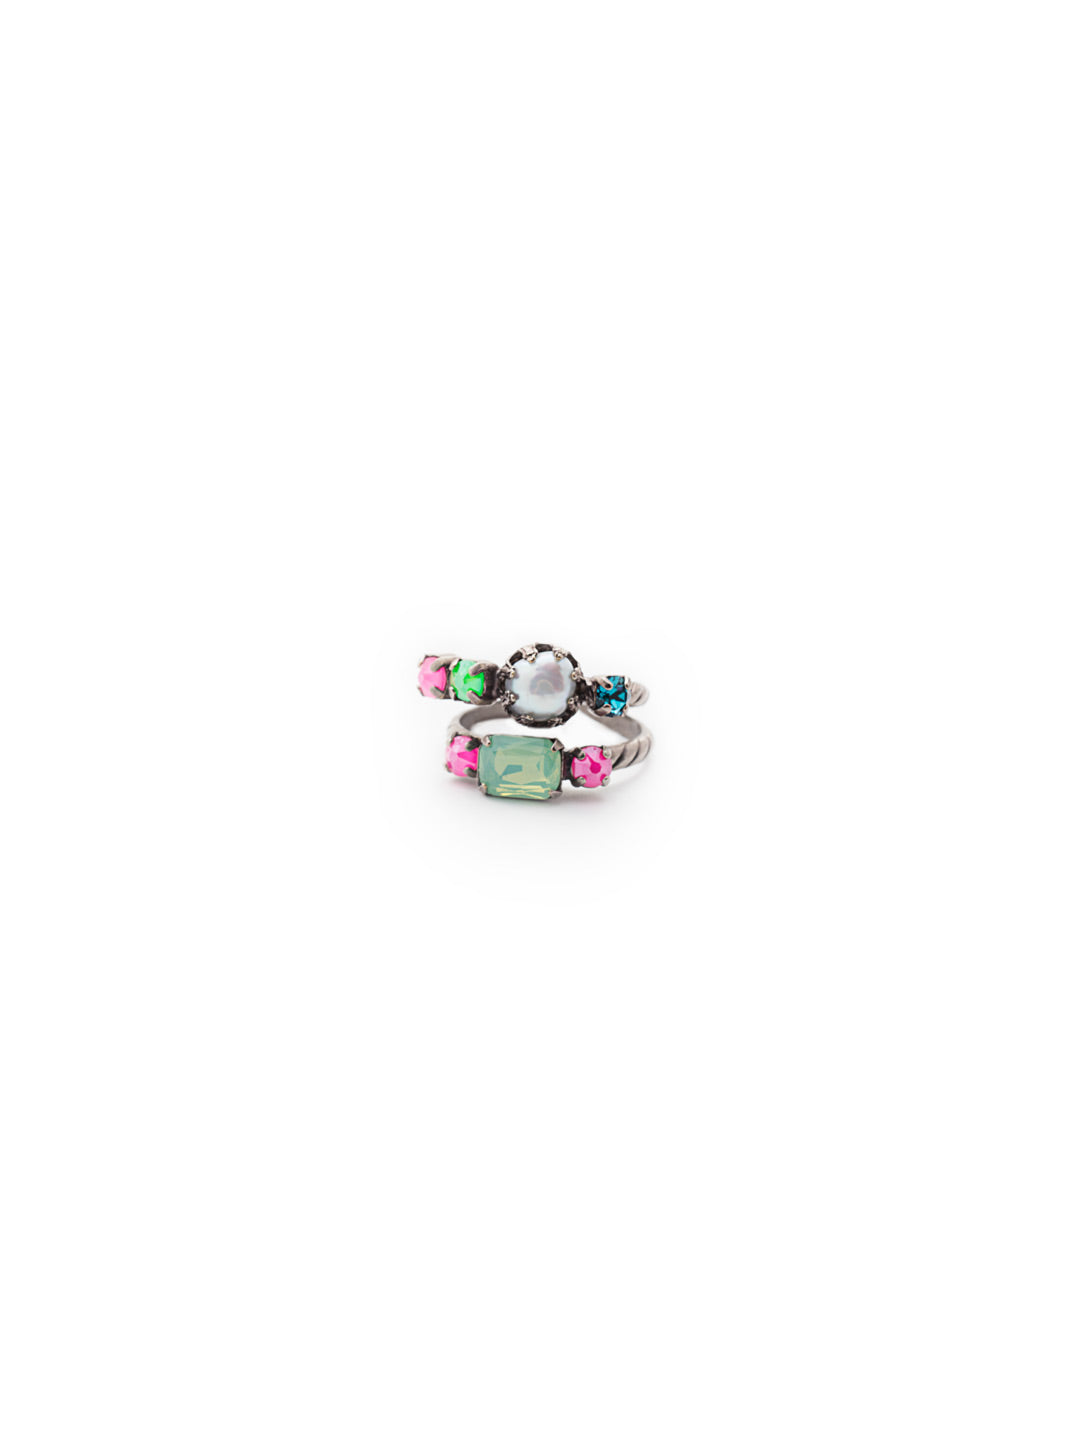 Emmanuella Stacked Ring - RES12ASWDW - <p>The Emmanuella Stacked Ring is beautifully bold, showcasing a double-layer of two-toned sparkling crystals in assorted shapes, accented by the delicate touch of a pearl. From Sorrelli's Wild Watermelon collection in our Antique Silver-tone finish.</p>